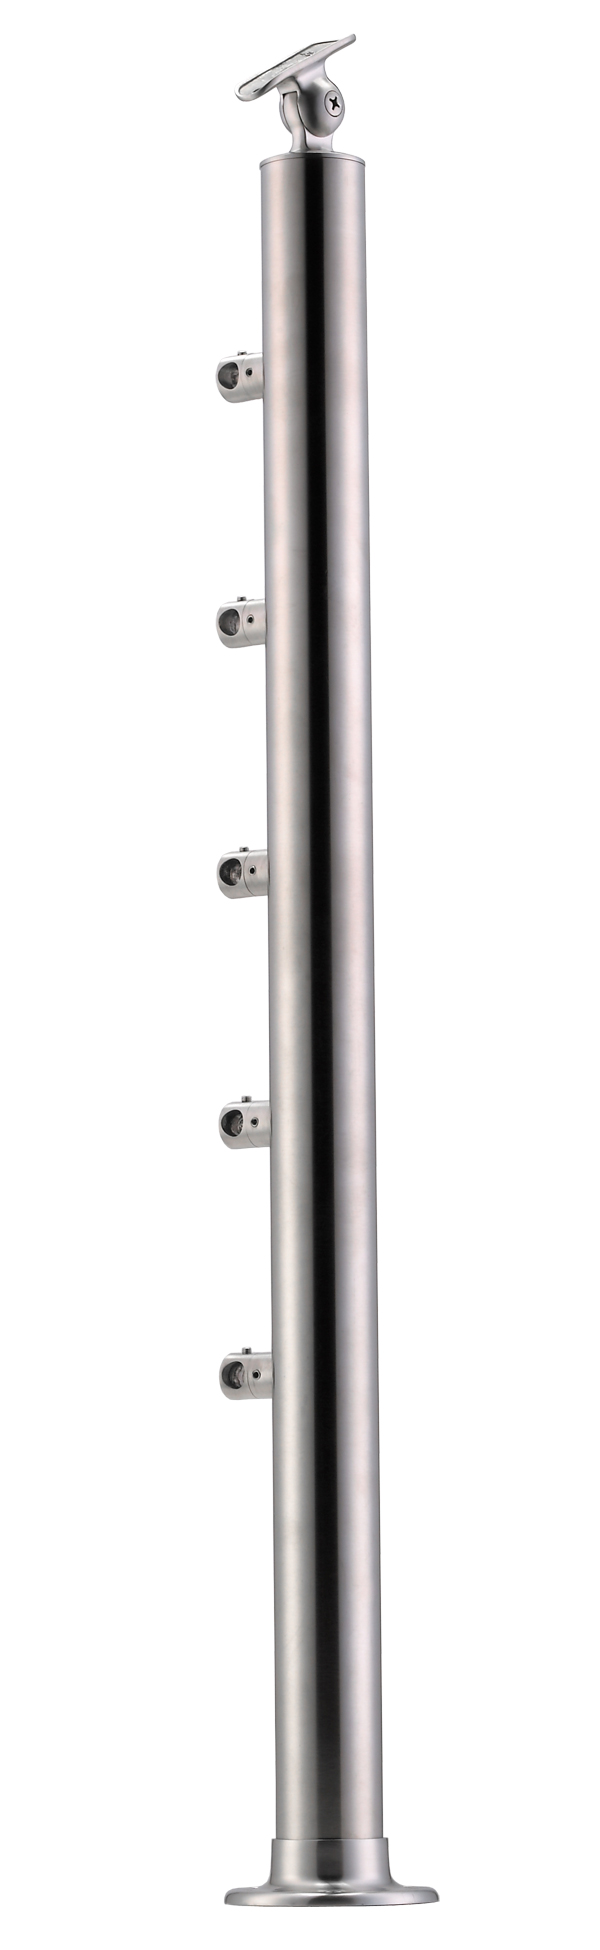 Stainless Steel Balustrade Posts - Tubular - SS:2020556A